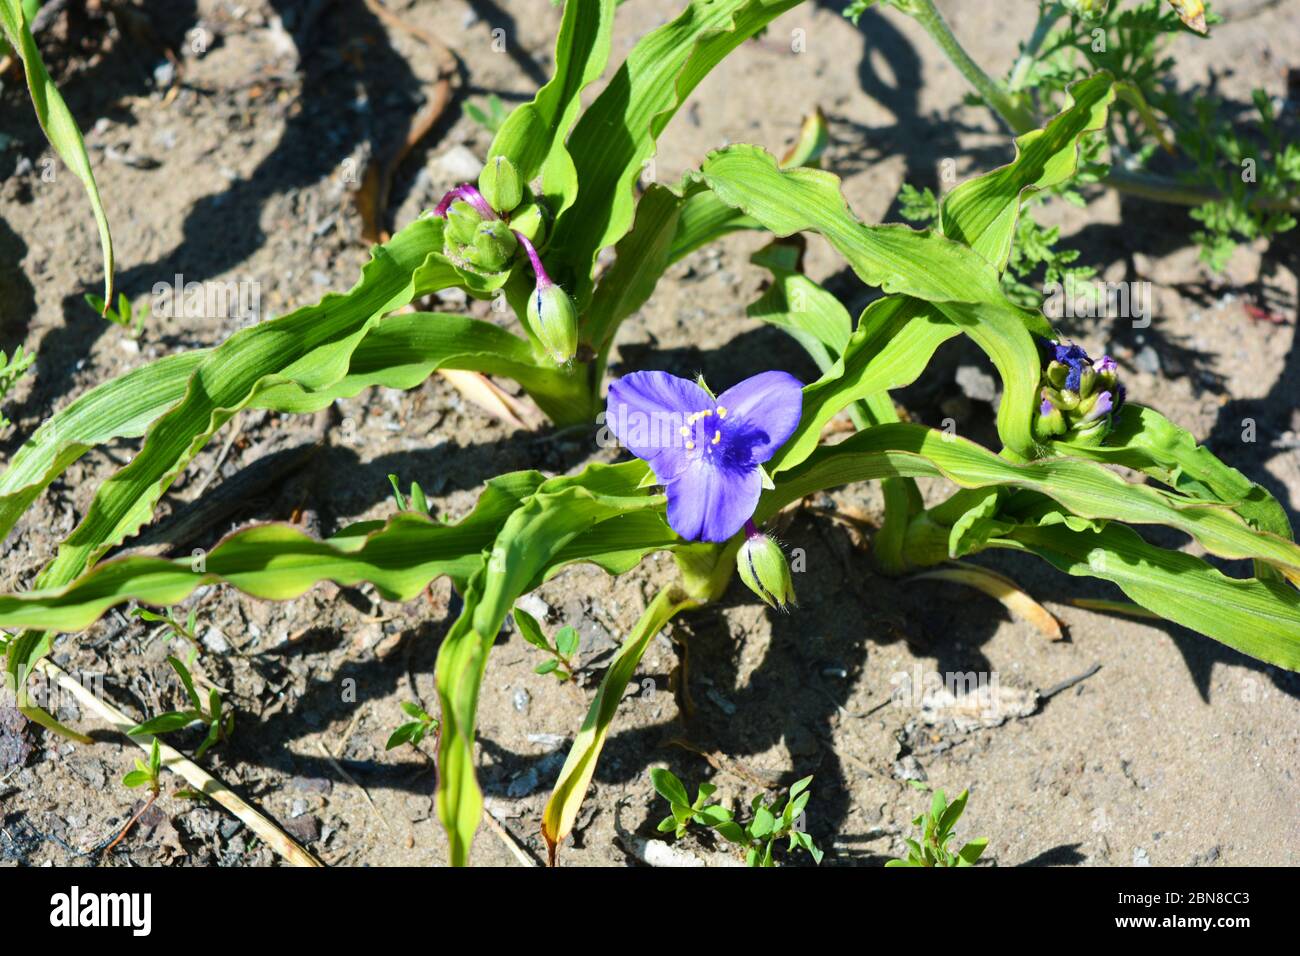 Bright and joyful May cottage plants with blue inflorescences lit by the sun. Tandescan bush with long leaves fuzzy in the ground, tradescantia. Stock Photo